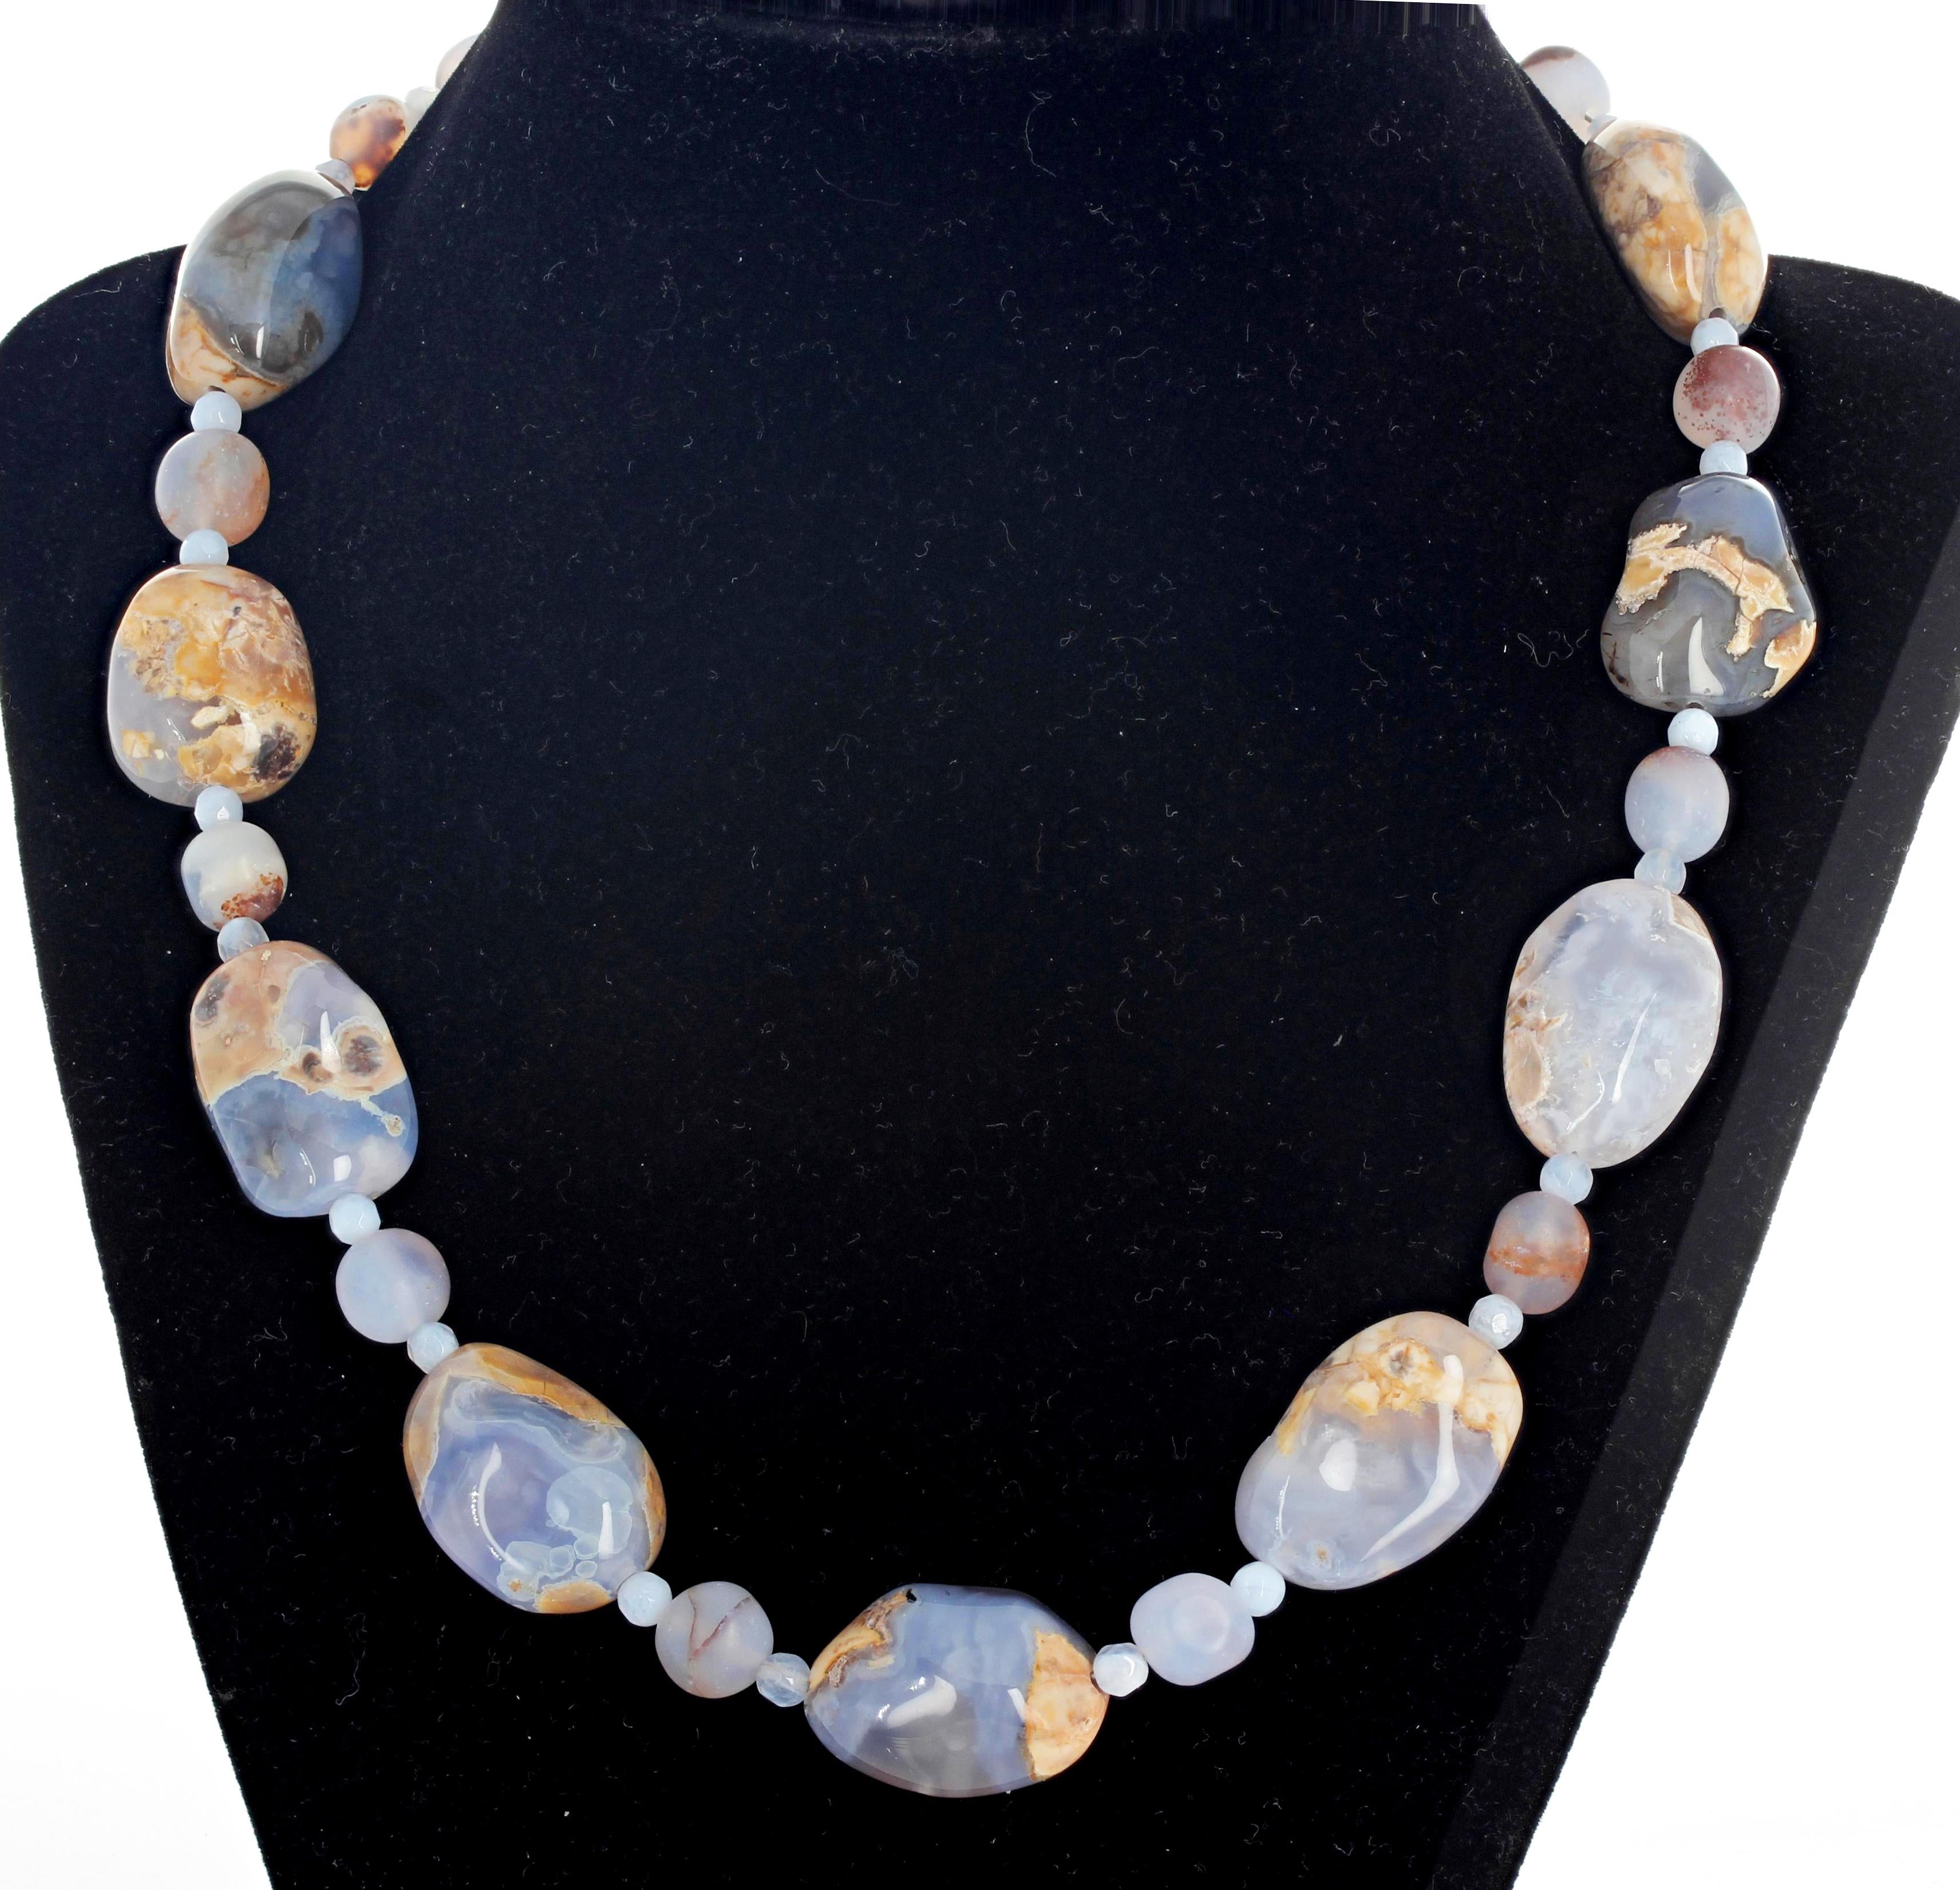 Women's or Men's Chalcedony, Chalcedony and Chalcedony Necklace